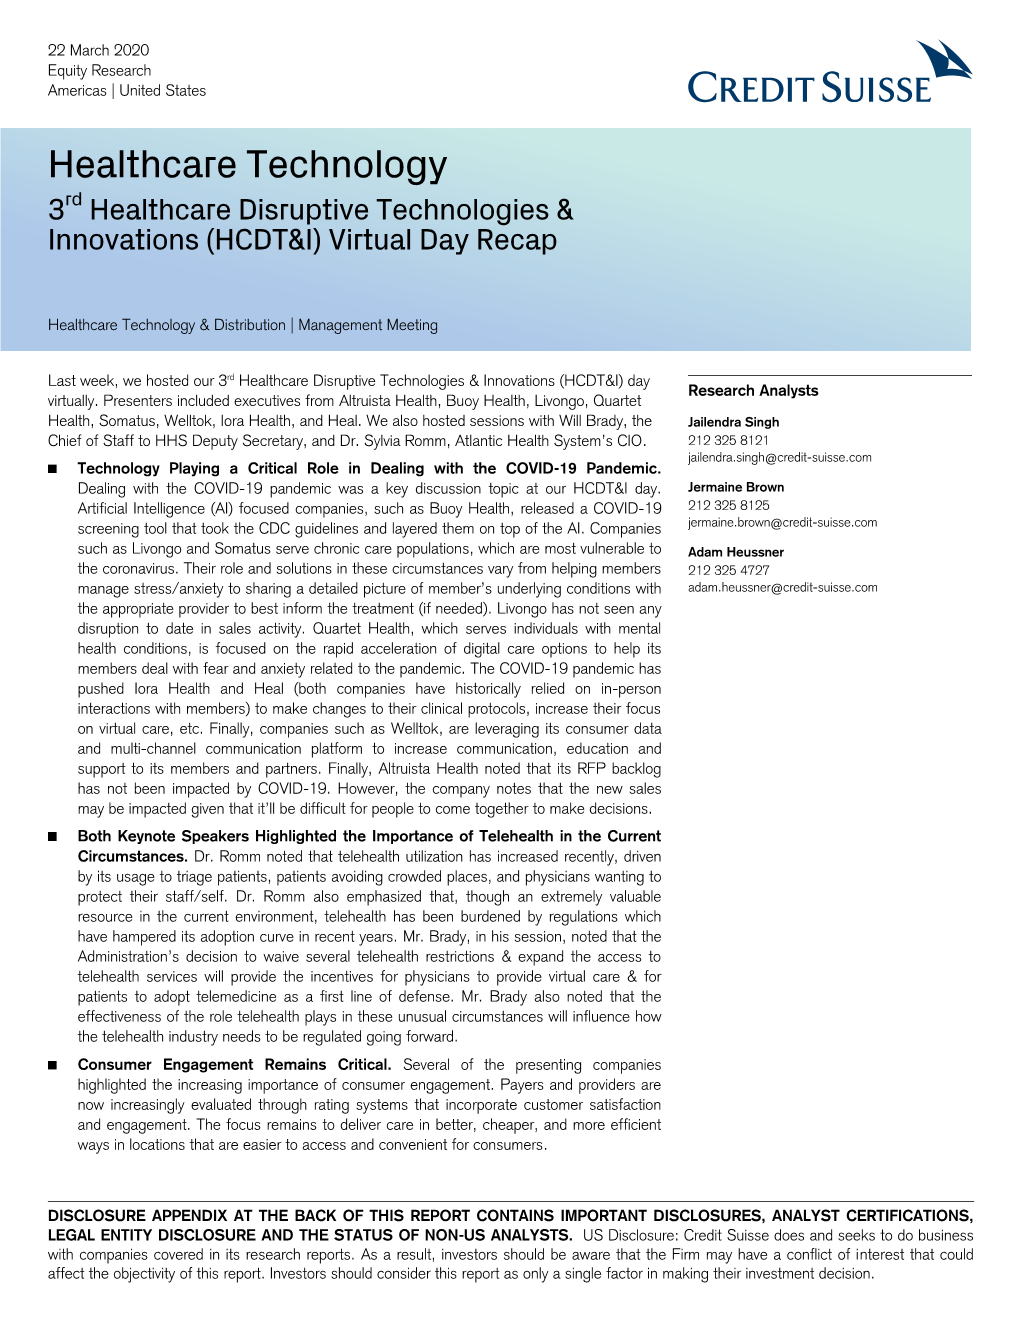 Healthcare Disruptive Technologies & Innovations